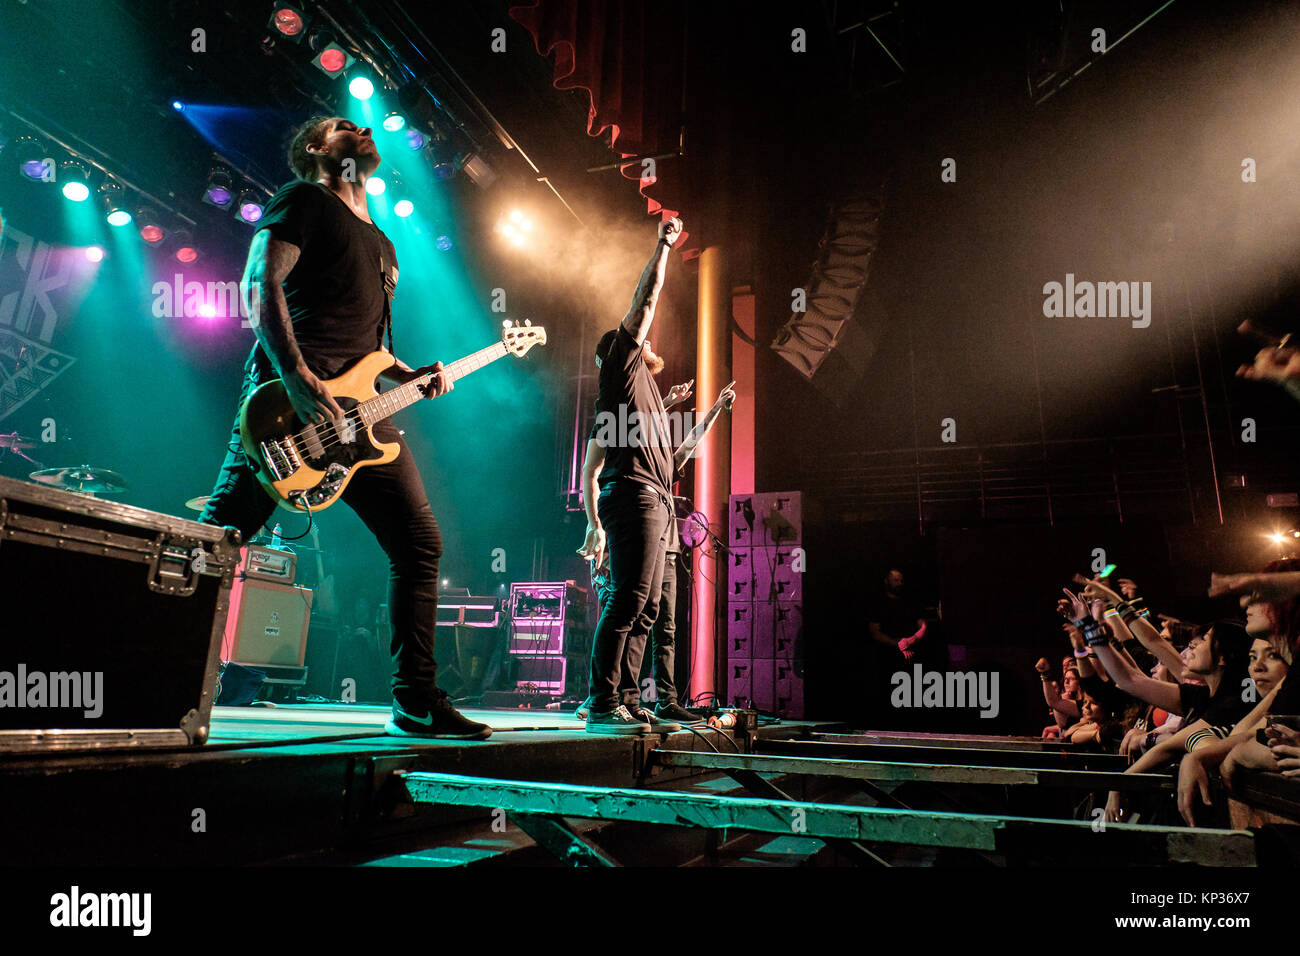 The American metalcore band We Came as Romans performs a live concert at  X-Tra in Zürich. Here vocalist Dave Stephens is seen live on stage with  bass player Andy Glass (L). Switzerland,